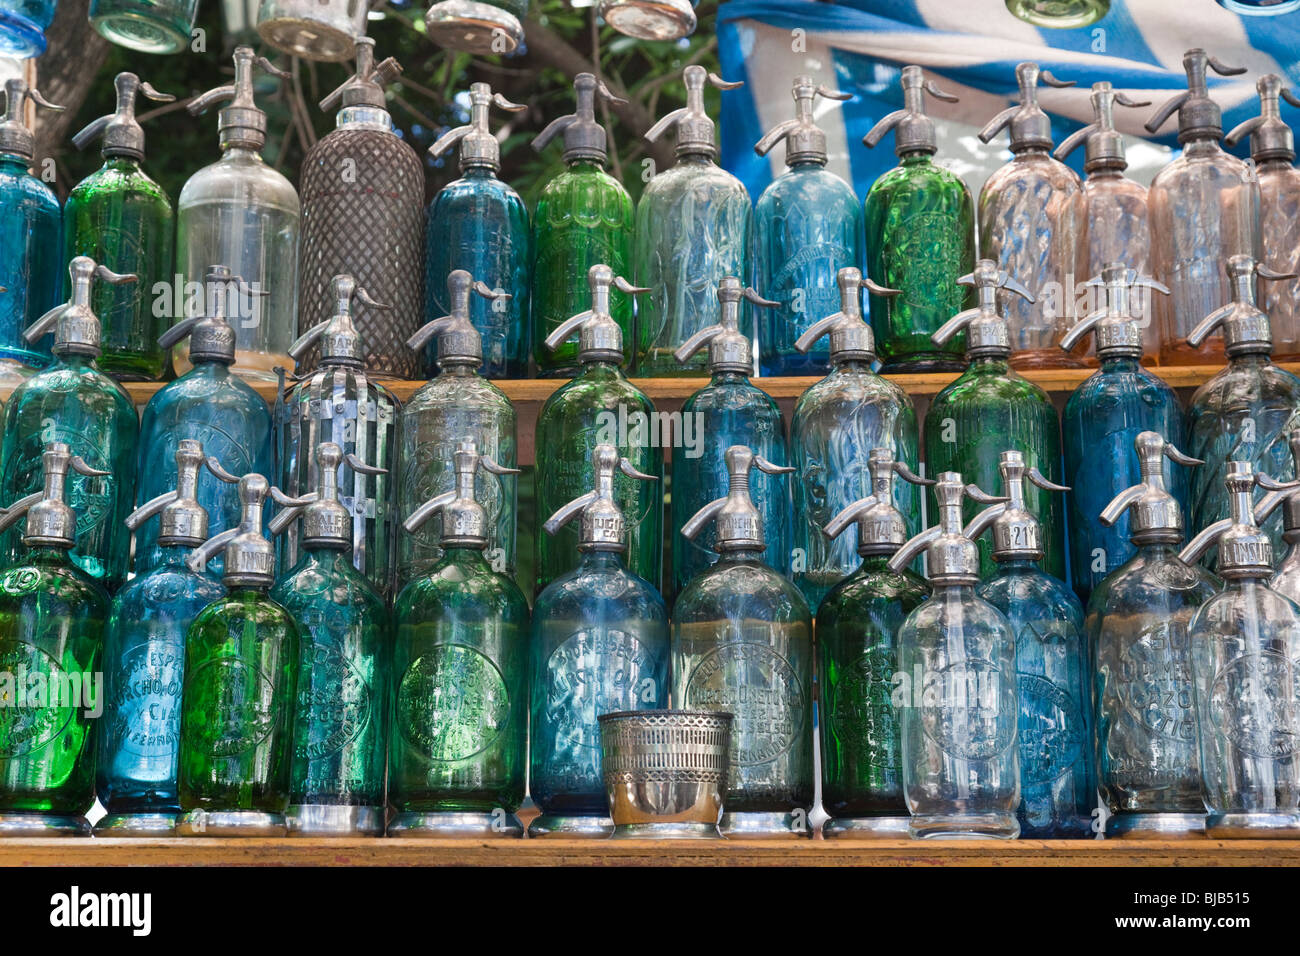 Old fashioned siphon bottles at market stall in San Telmo, Buenos Aires, Argentina Stock Photo